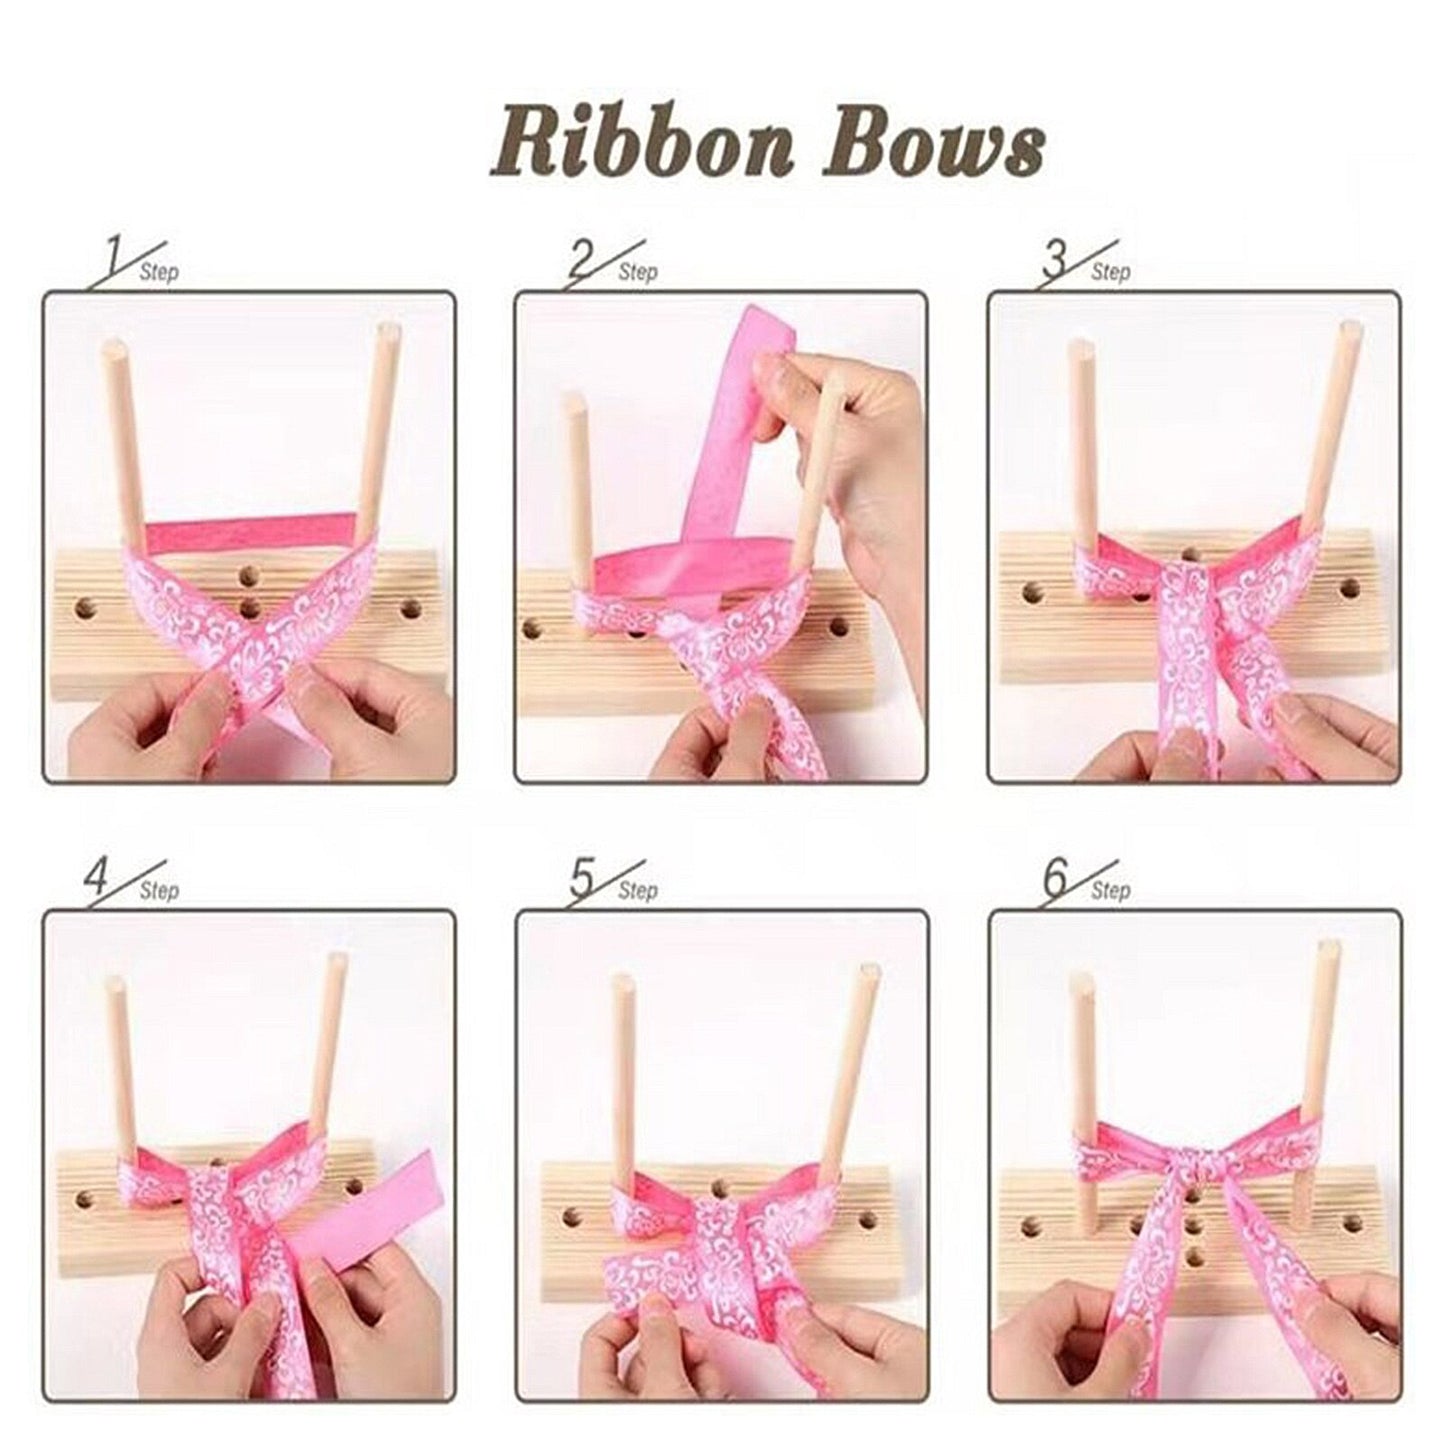 Durable Bow Maker 5 In 1 Multipurpose Bow Lightweight Making Tool DIY Craft For Gifts Or Party Decorations